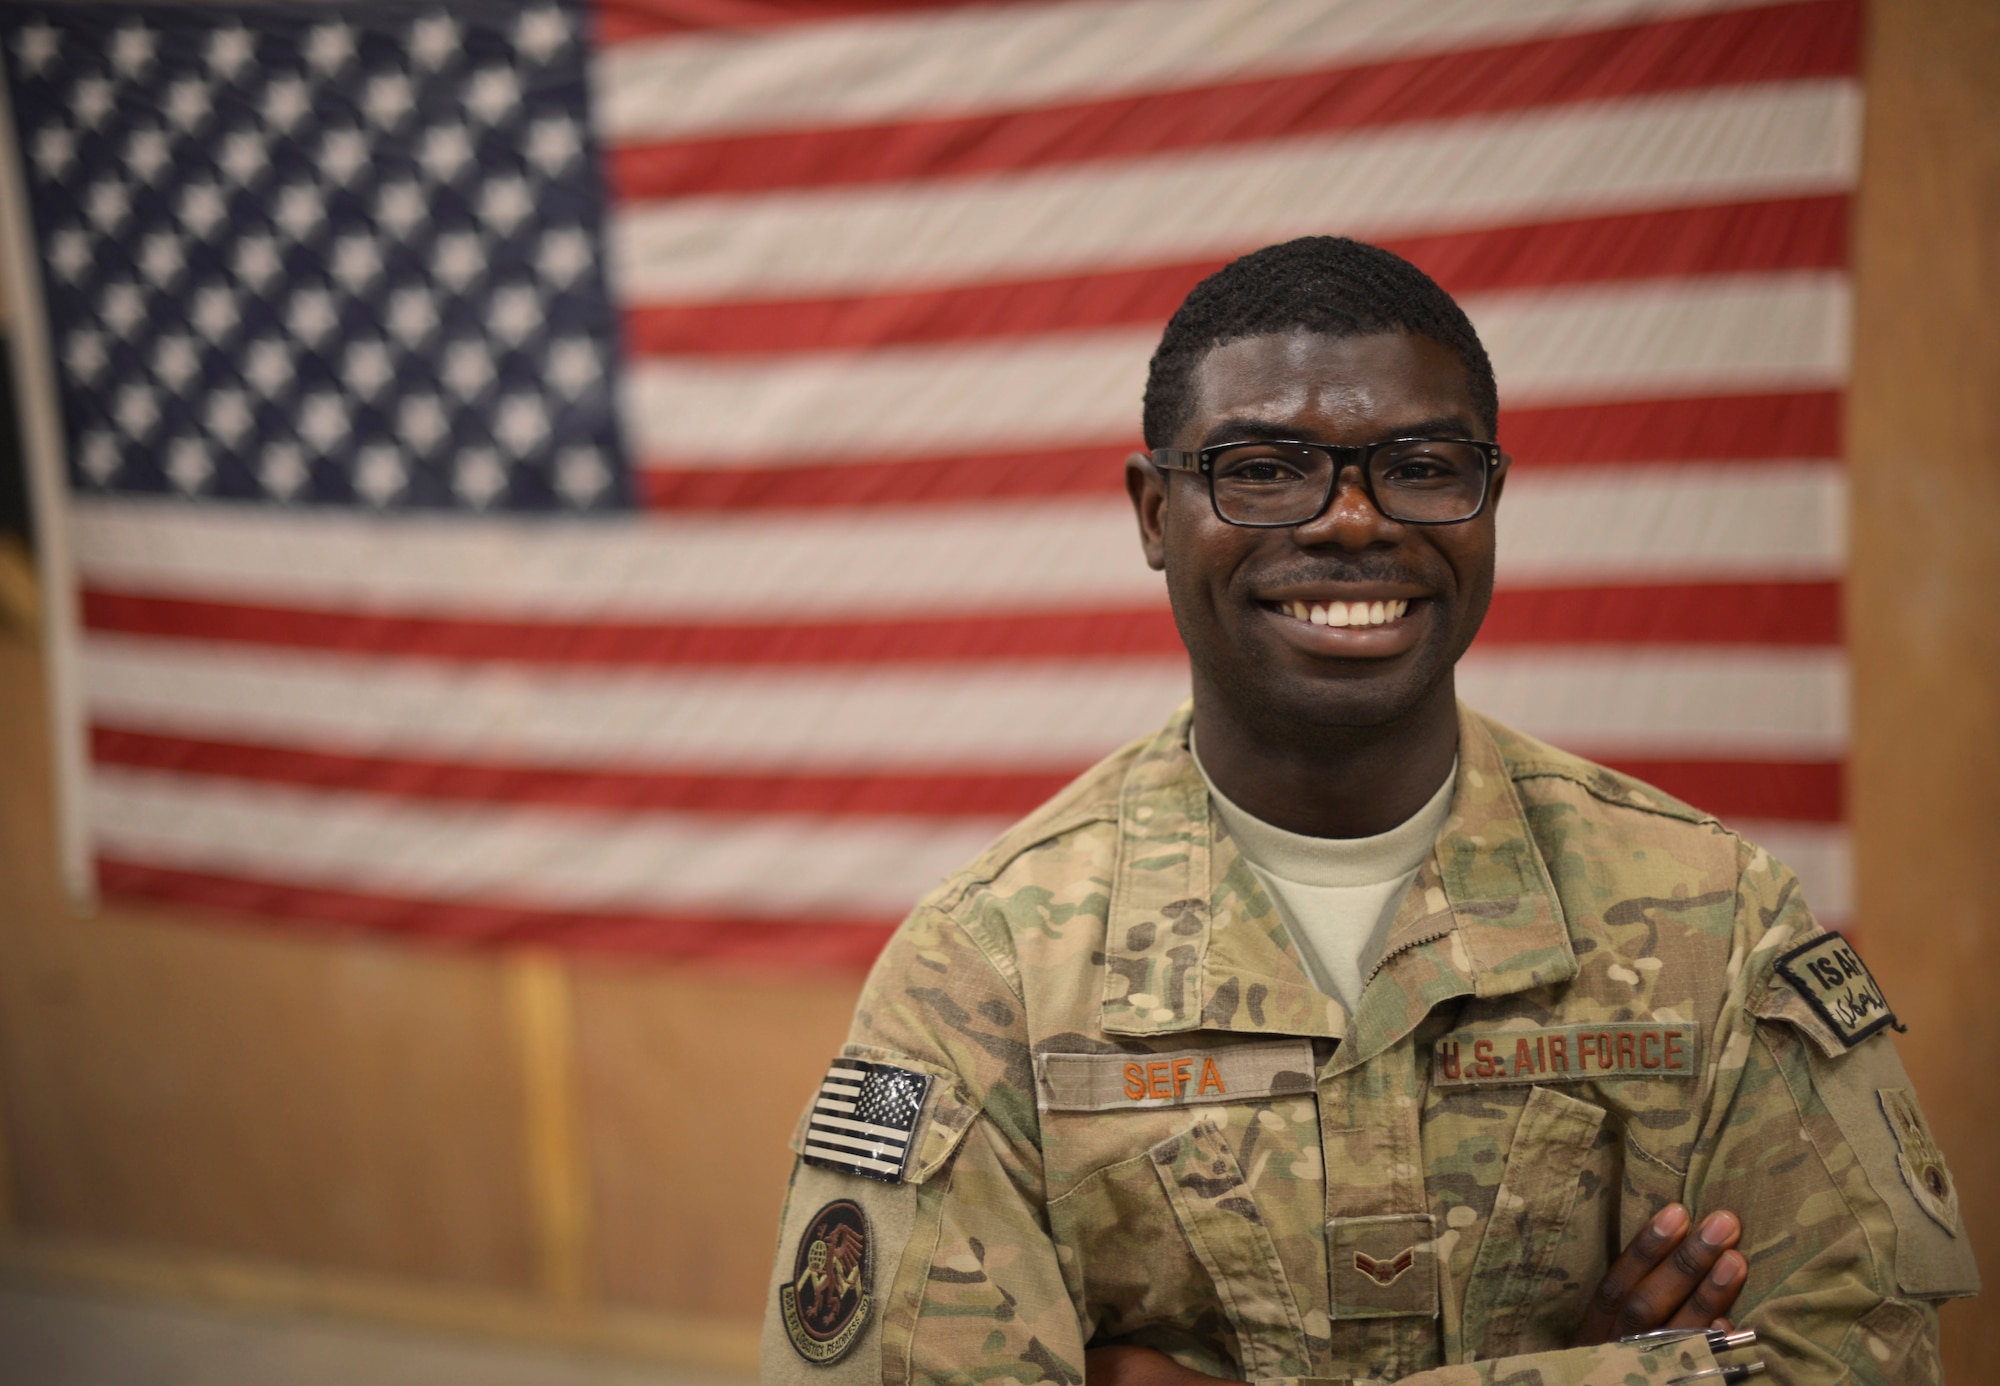 Airman 1st Class Nana Sefa is deployed to Bagram Airfield, Afghanistan, from Holloman Air Force Base, New Mexico. Following this deployment, Sefa, a native of Ghana, will see his wife for the first time after being apart for two years. Sefa is a 455th Expeditionary Logistics Readiness Squadron vehicle management analysis craftsman. (U.S. Air Force photo/Staff Sgt. Evelyn Chavez)